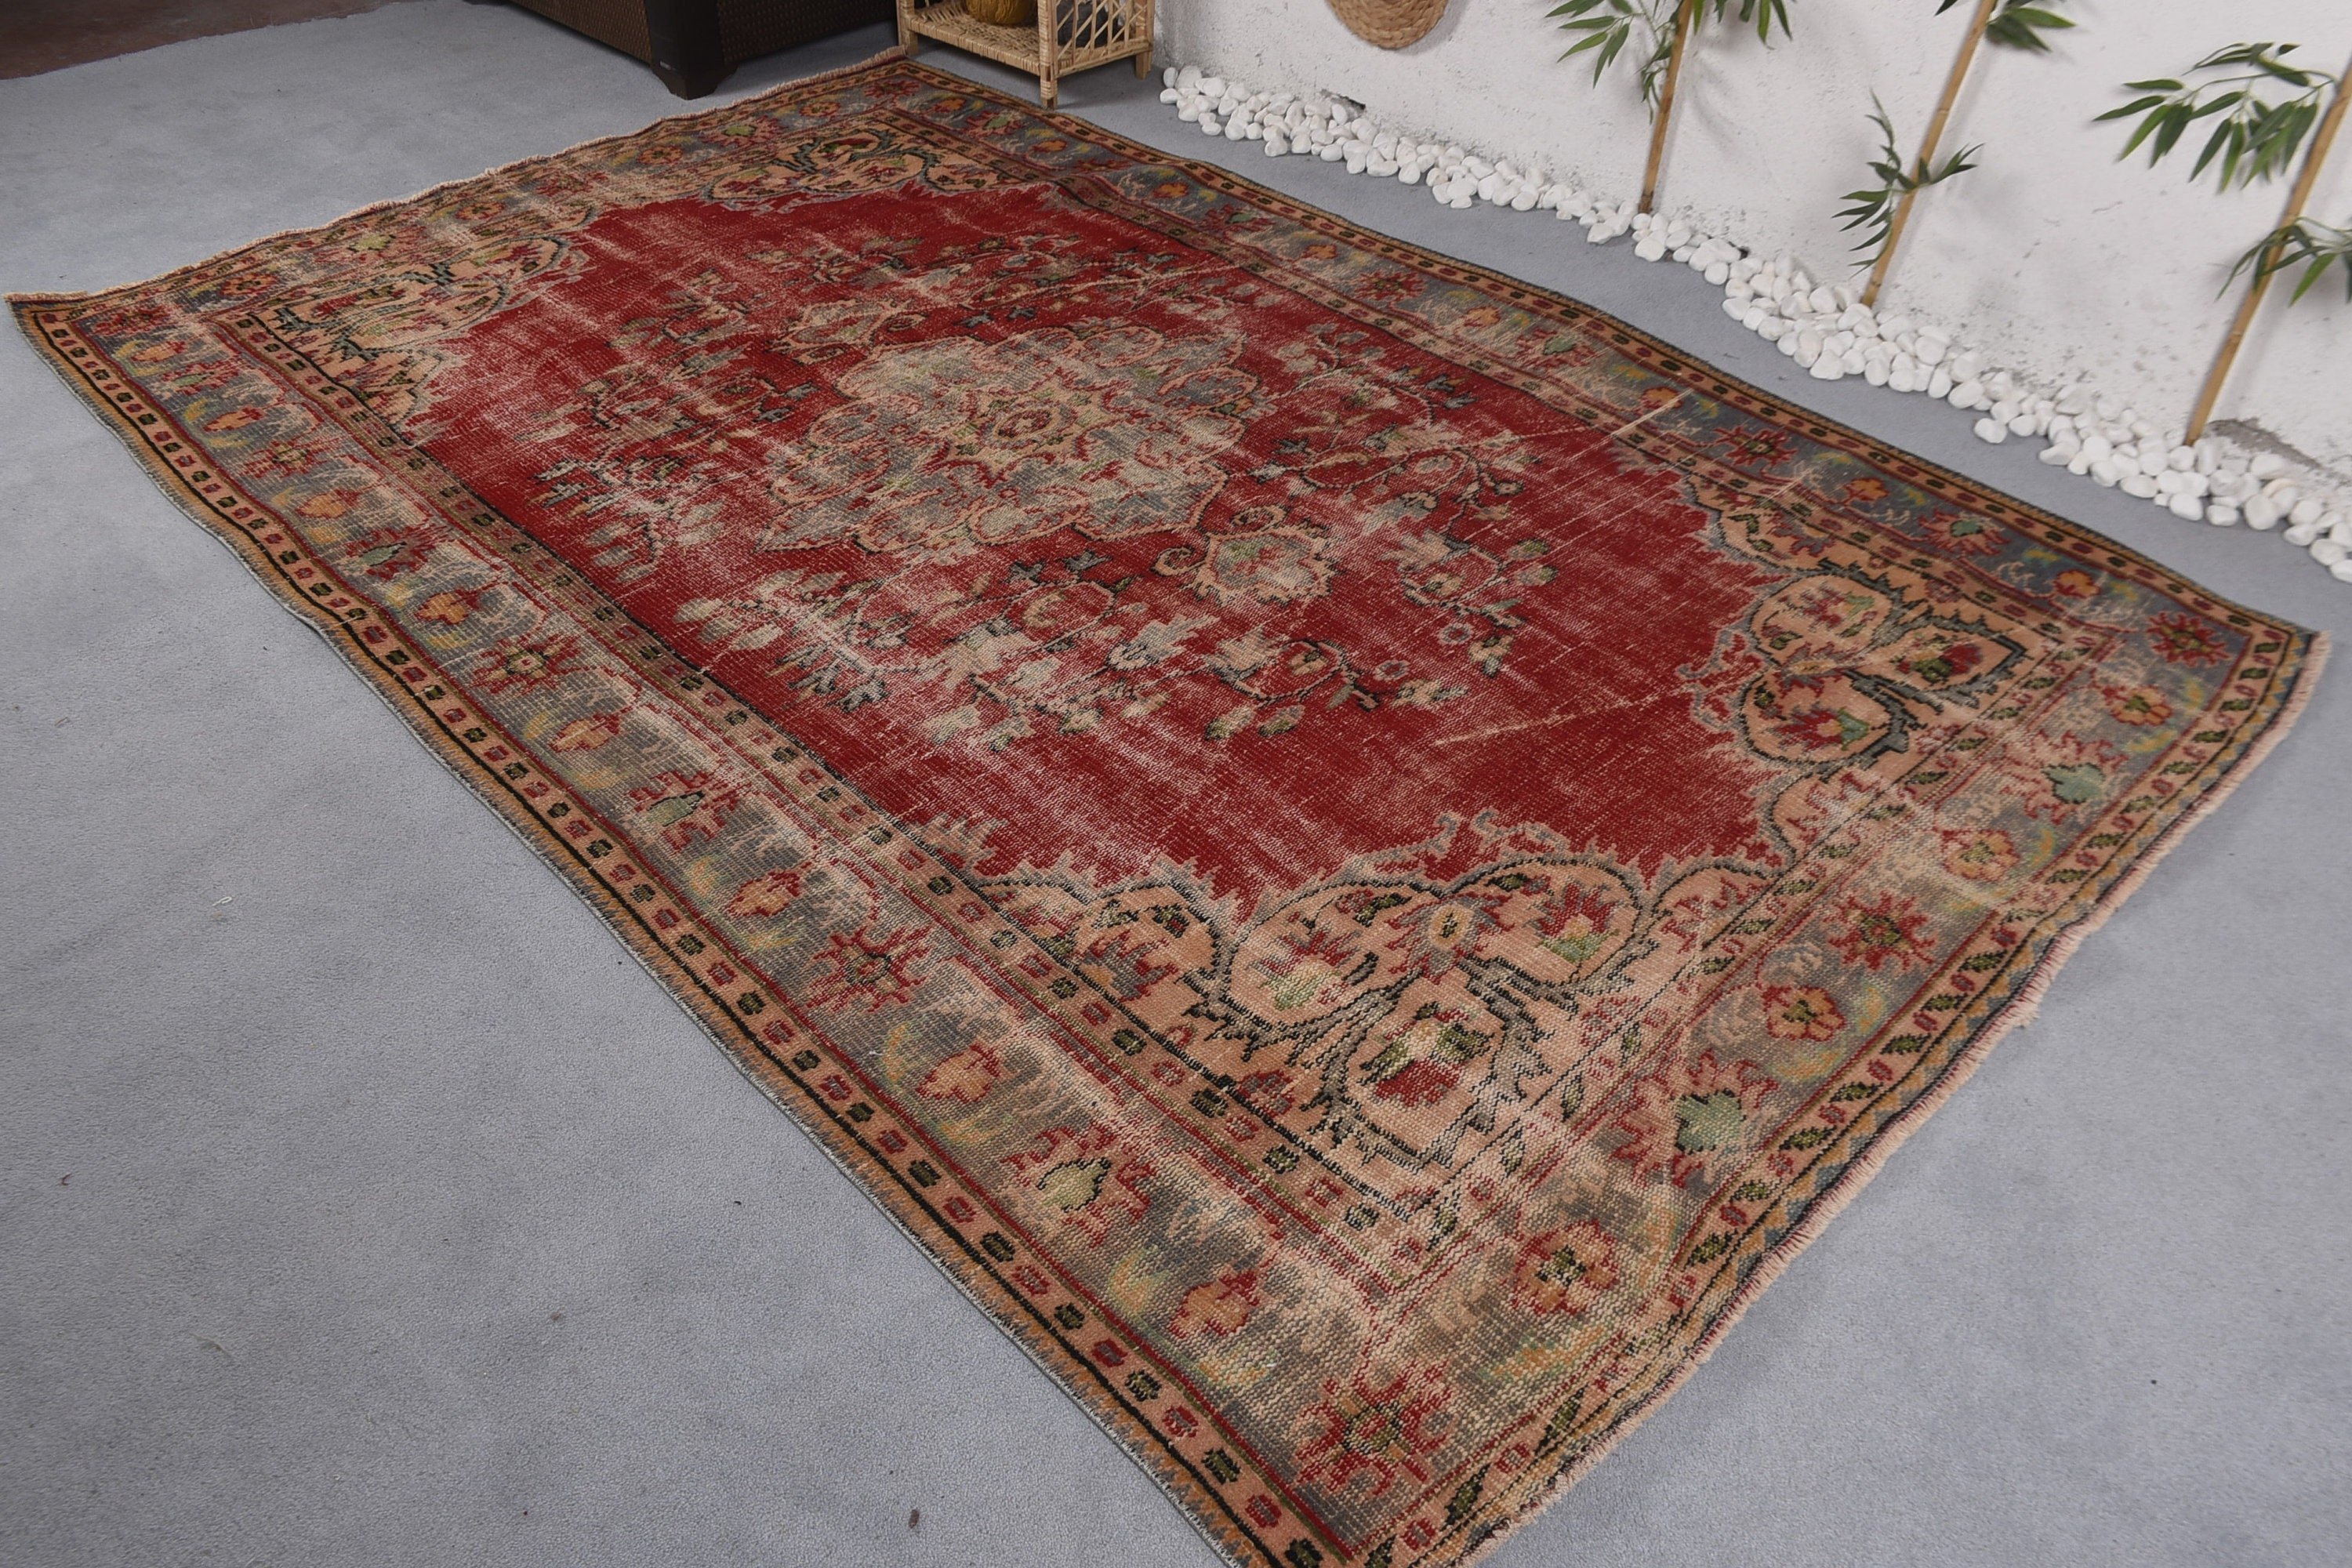 Aztec Rugs, Vintage Rugs, Salon Rugs, Moroccan Rug, 6.1x9.6 ft Large Rug, Dining Room Rug, Red Antique Rugs, Turkish Rugs